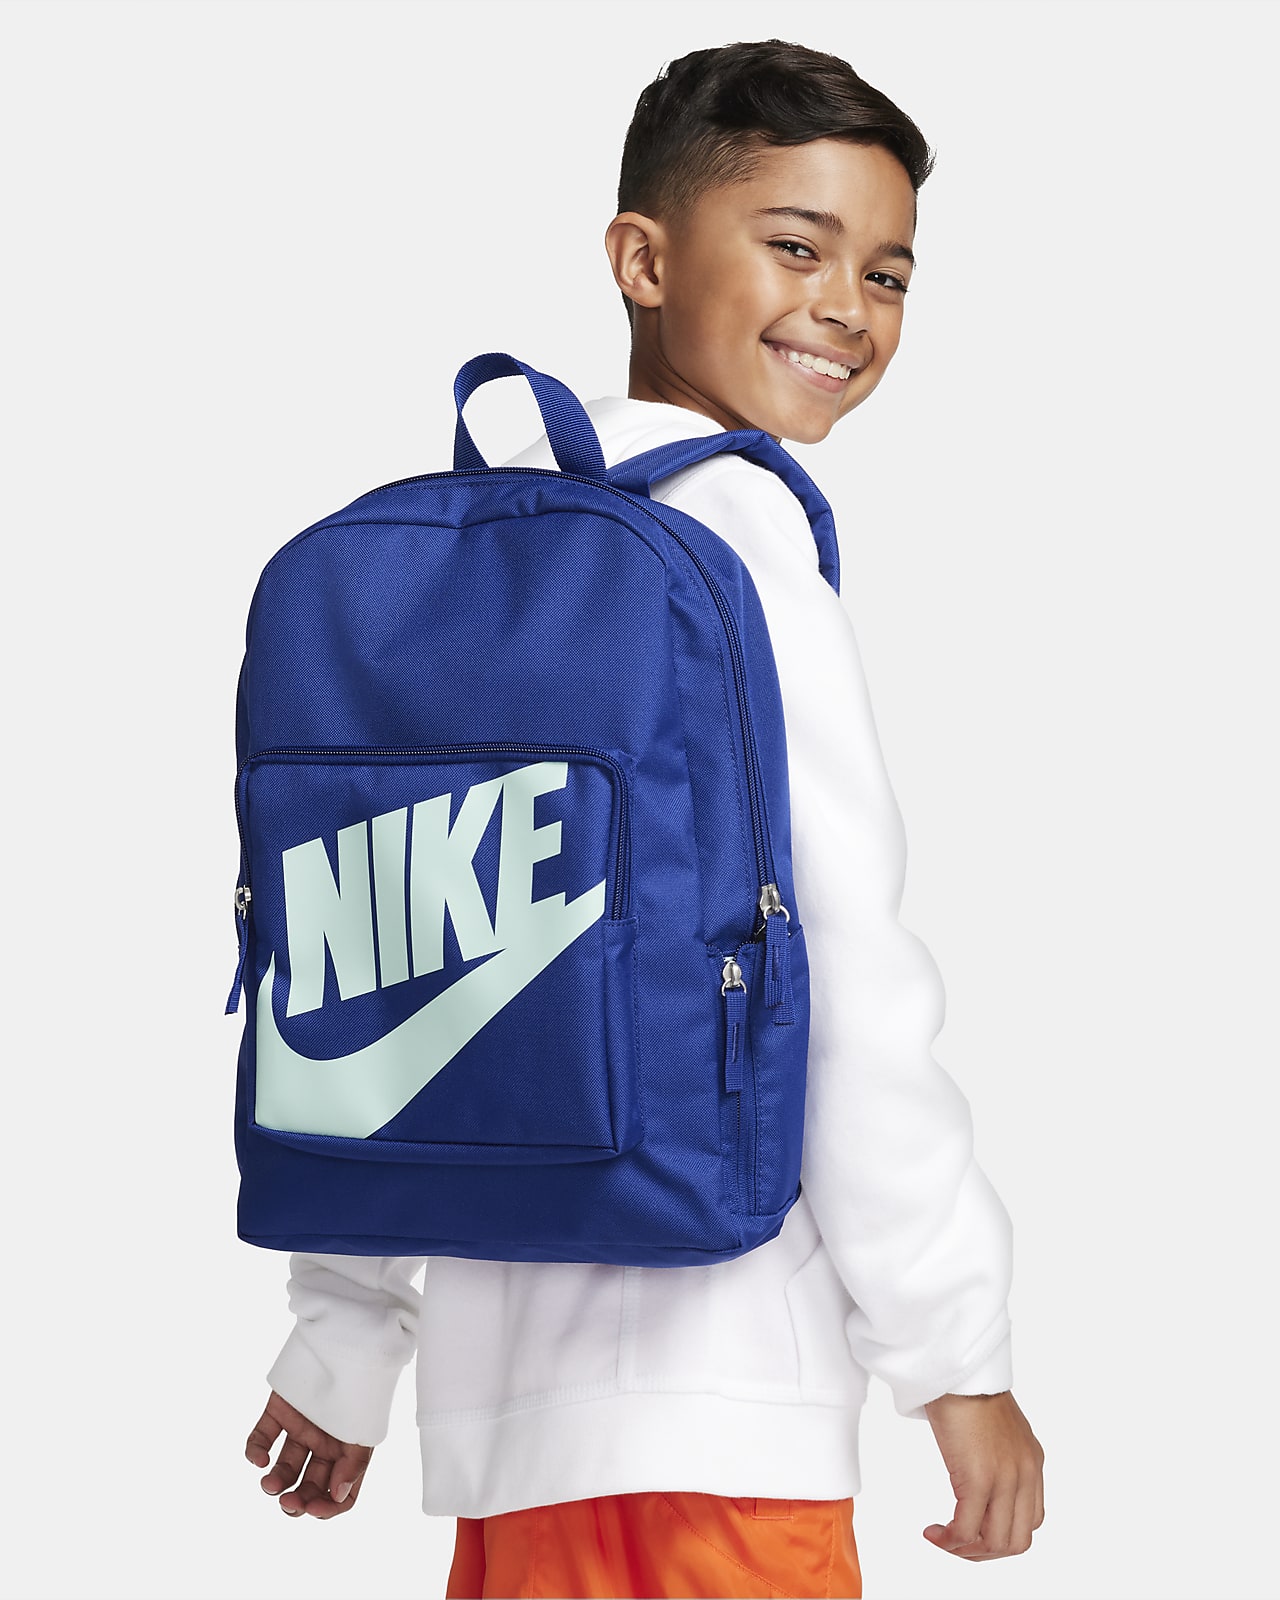 Buy Nike One Backpack from Next Finland